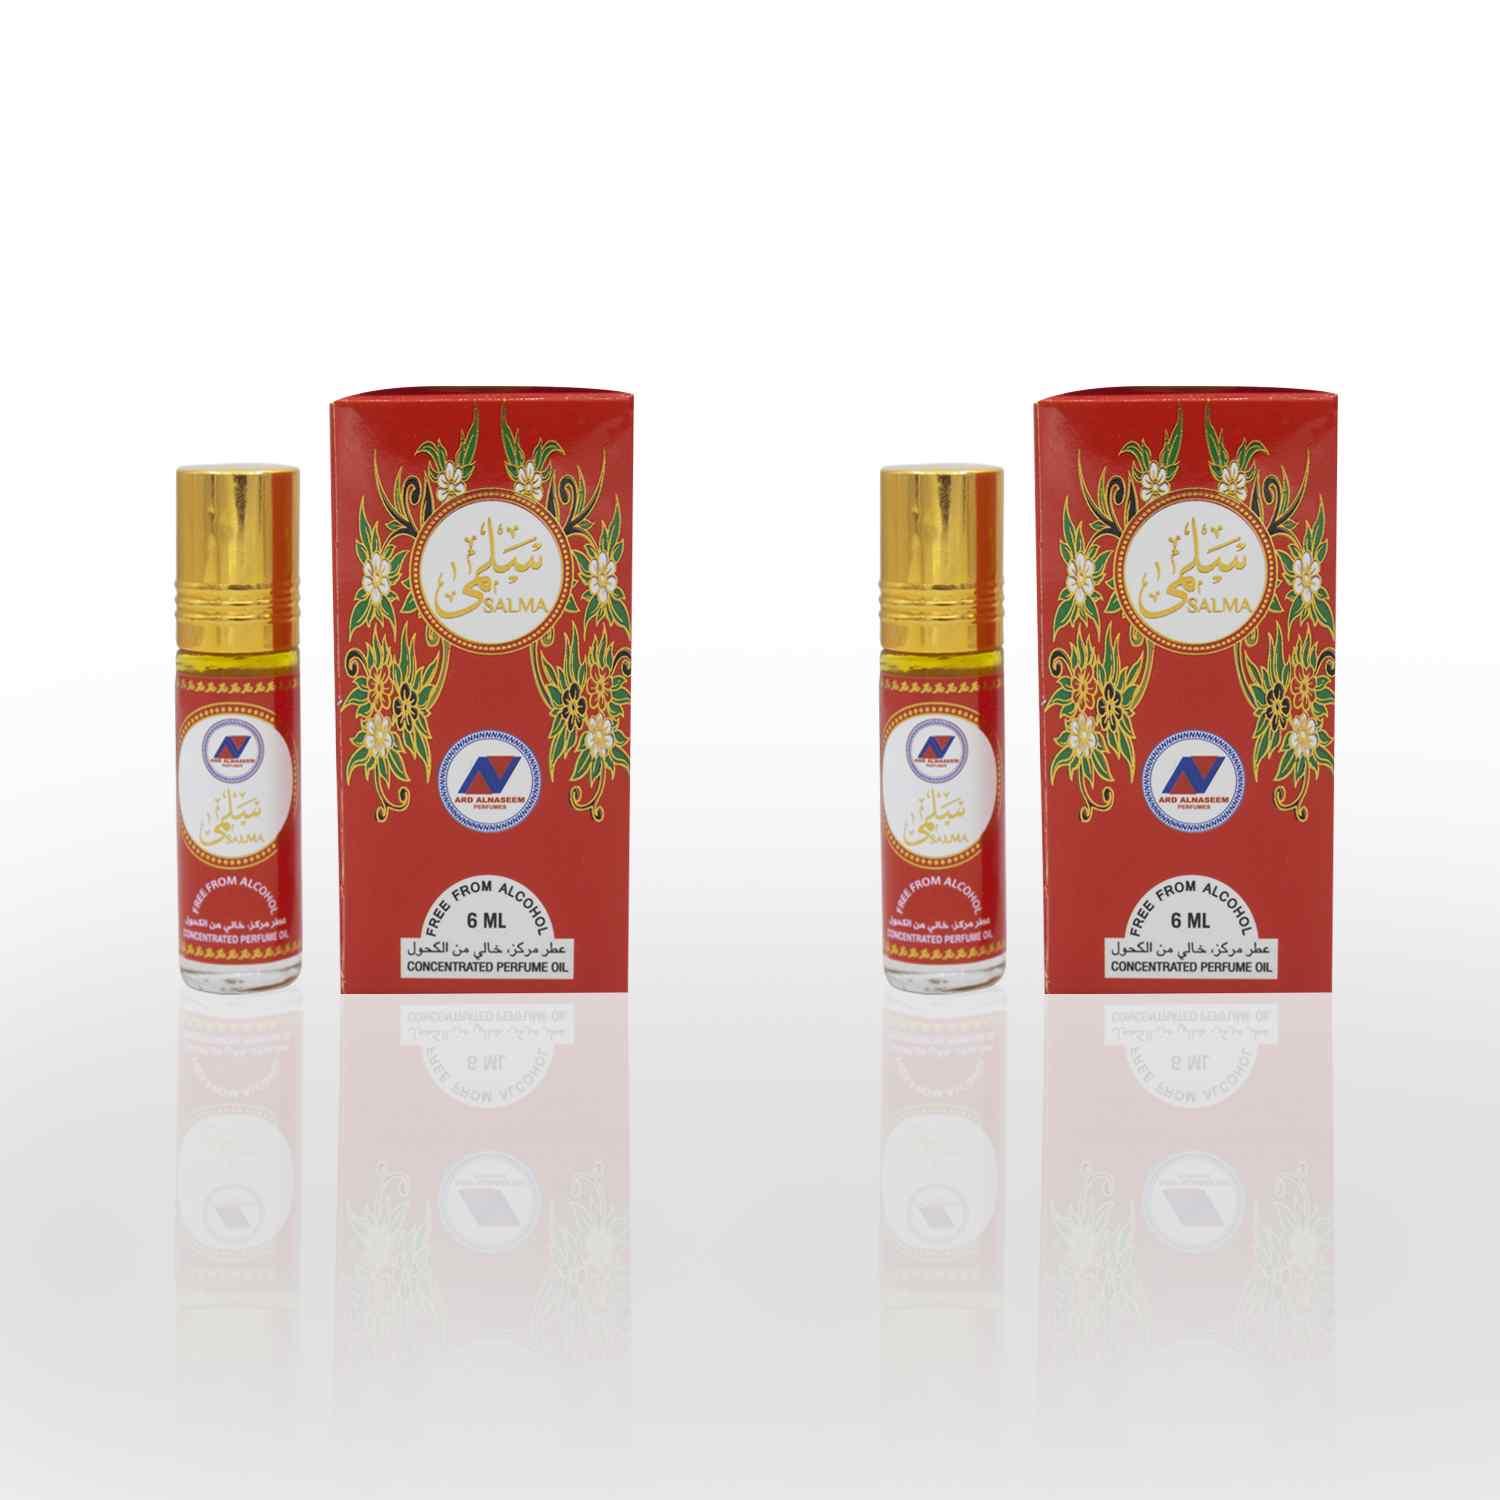 Salma concentrated oil attar rollon 6ml by Ard perfumes